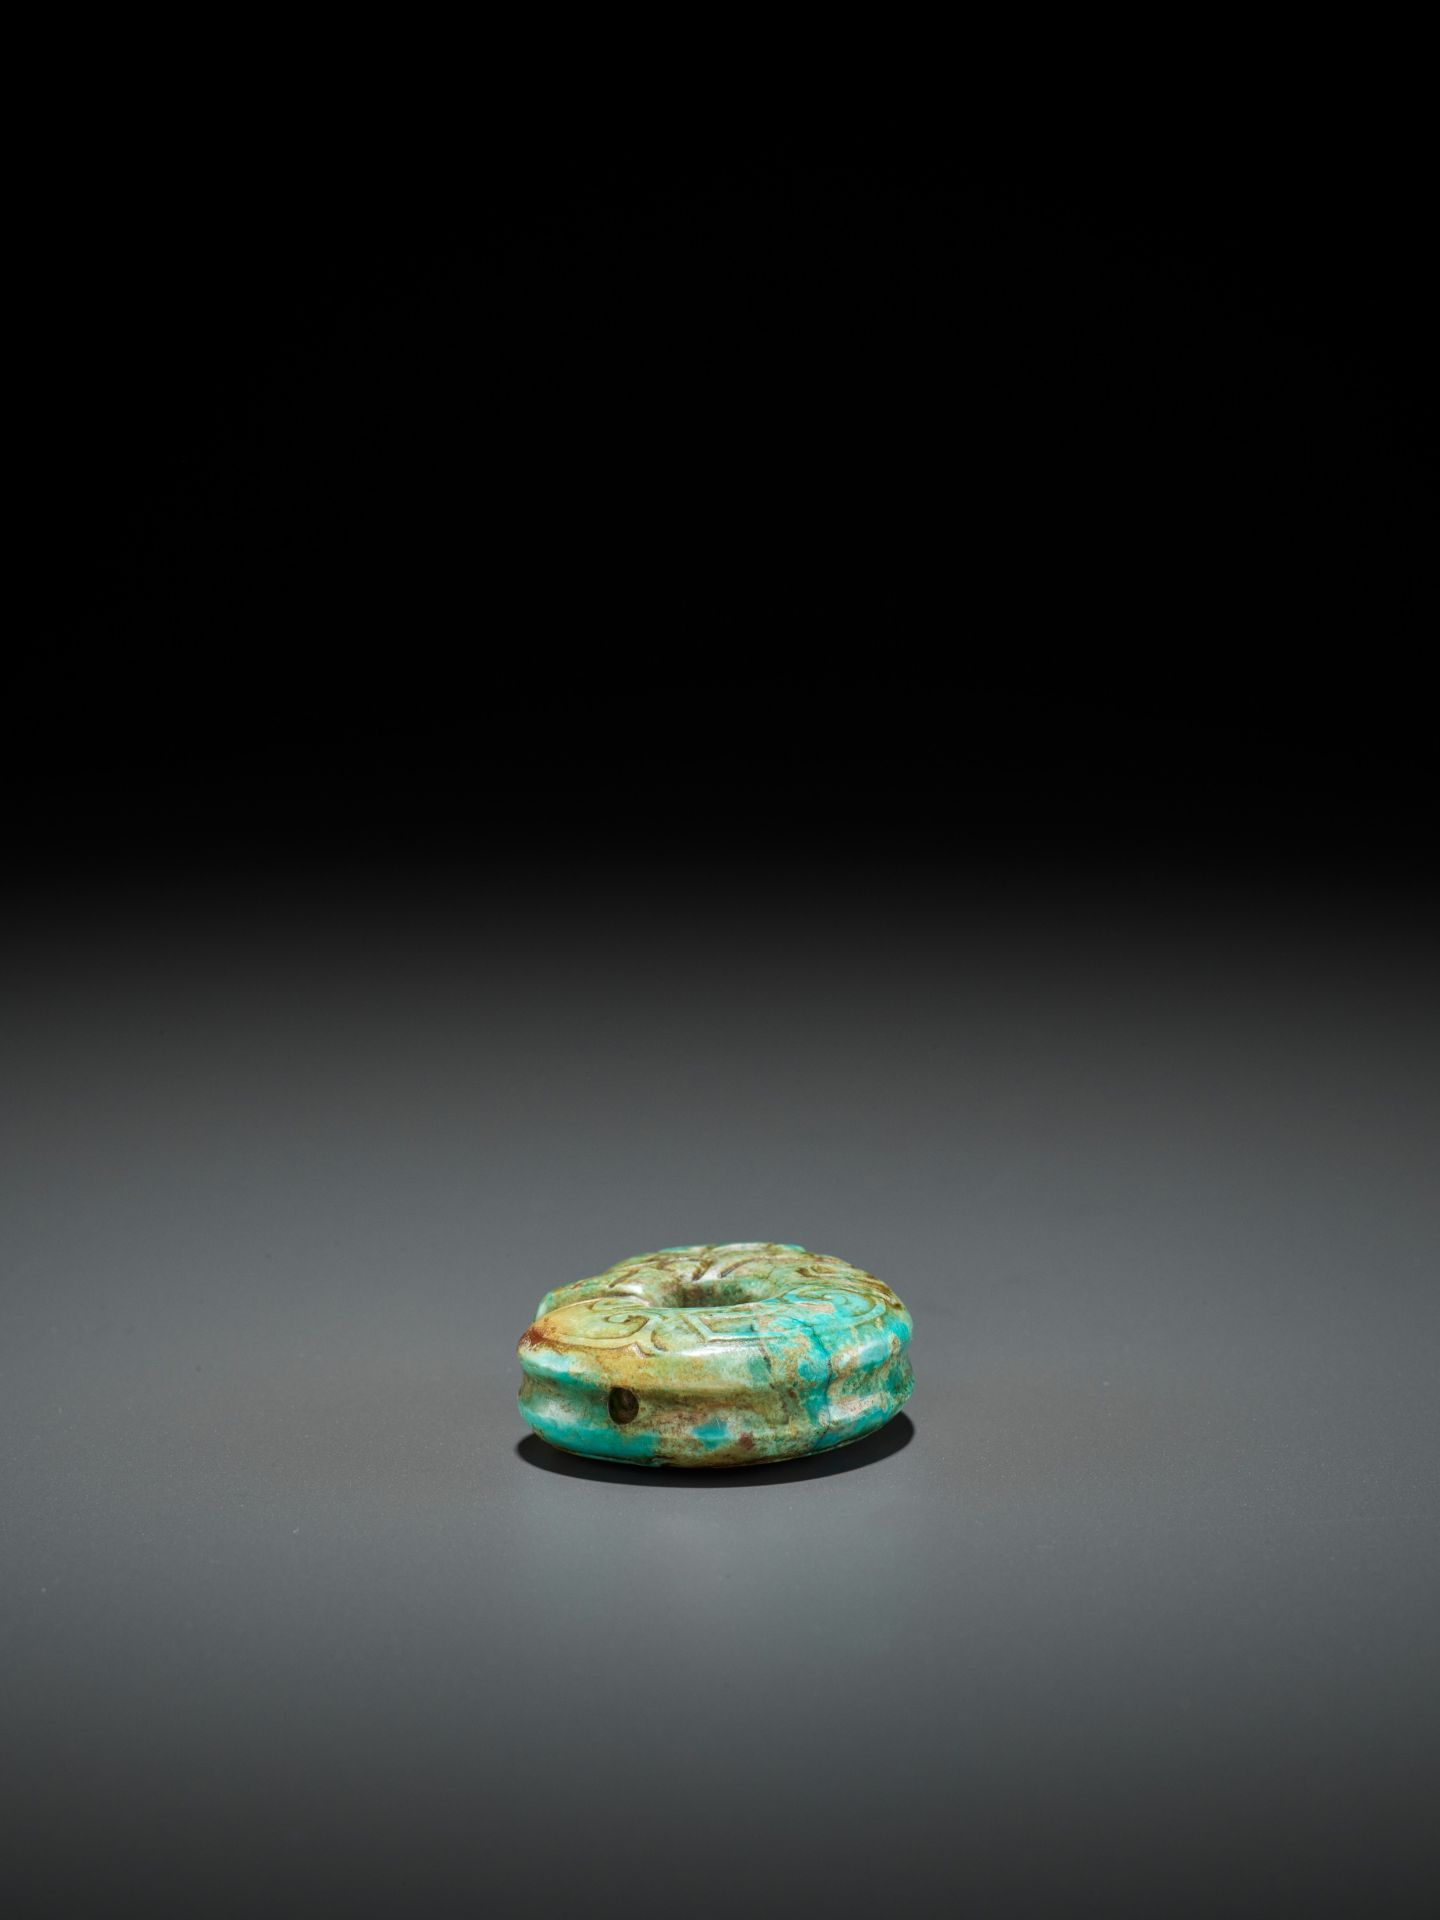 A TURQUOISE MATRIX 'PIG-DRAGON' PENDANT, SHANG TO WESTERN ZHOU DYNASTY - Image 13 of 14